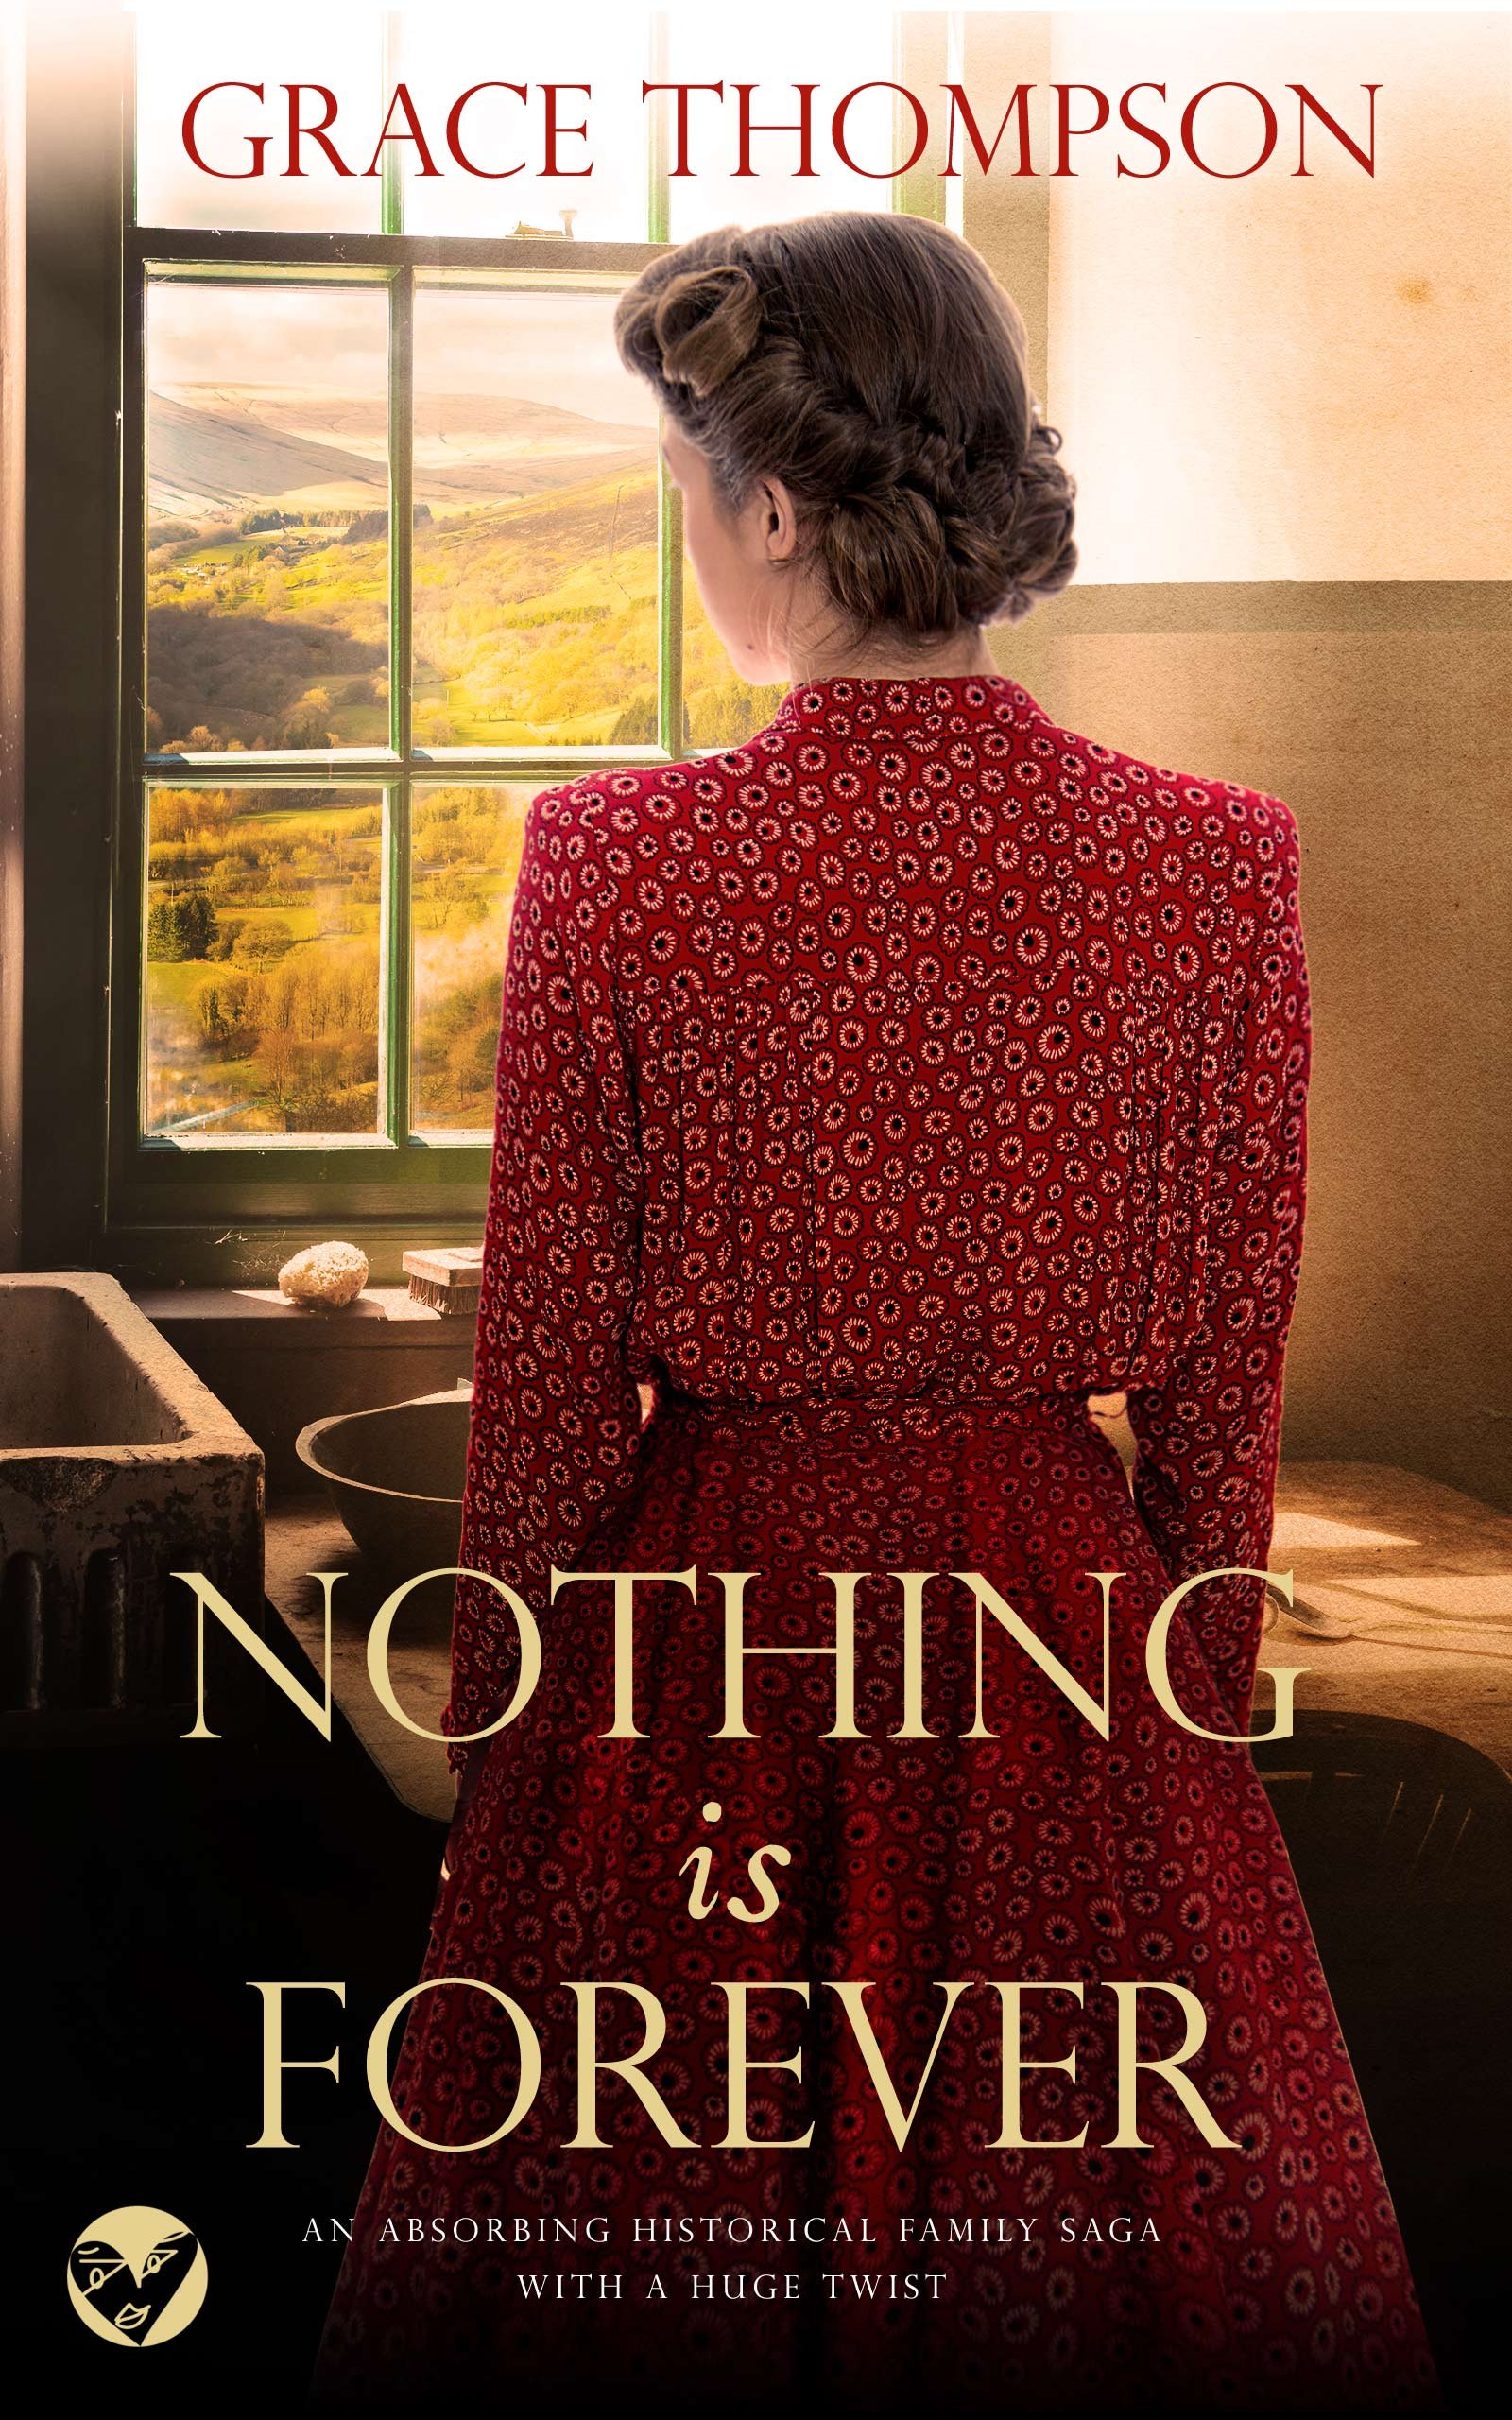 NOTHING IS FOREVER Cover publish 633KB.jpg